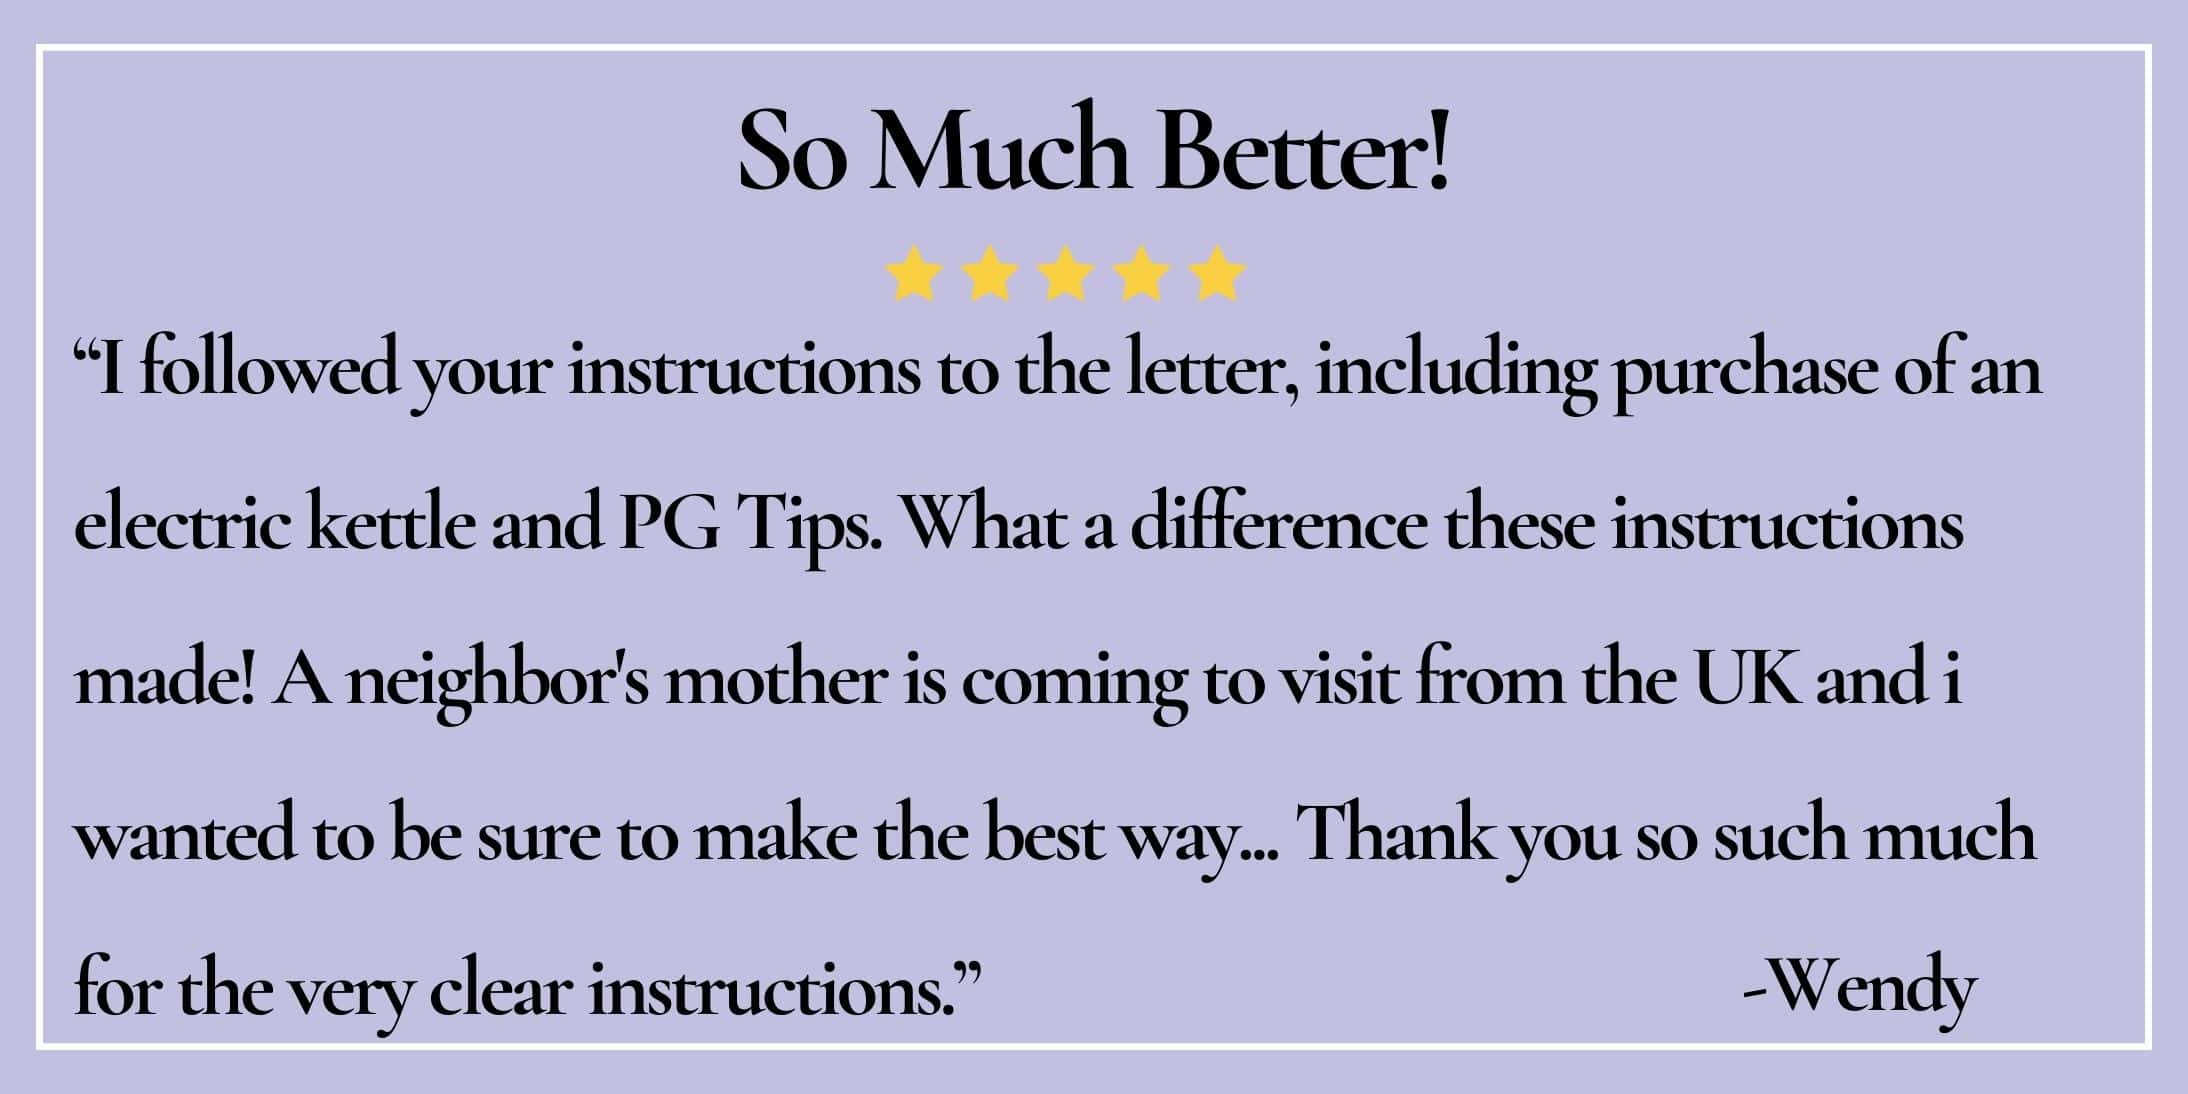 text box with paraphrase: So Much Better! I followed your instructions to the letter...what a difference! - Wendy